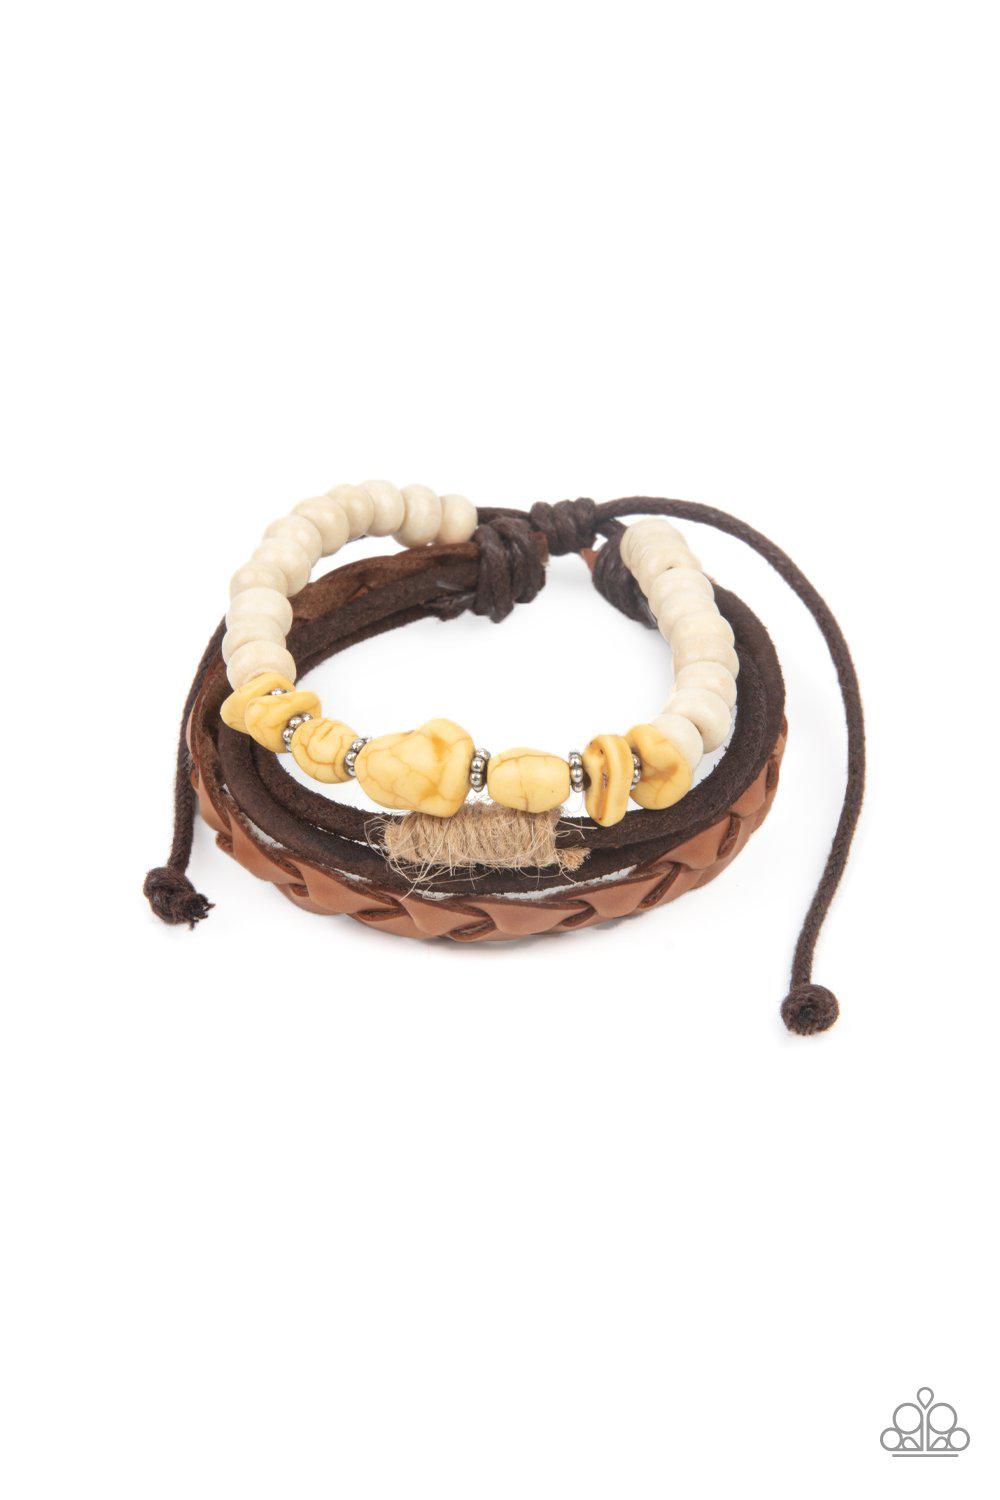 Far Out Wayfair Yellow Stone and Brown Leather Urban Knot Bracelet - Paparazzi Accessories- lightbox - CarasShop.com - $5 Jewelry by Cara Jewels